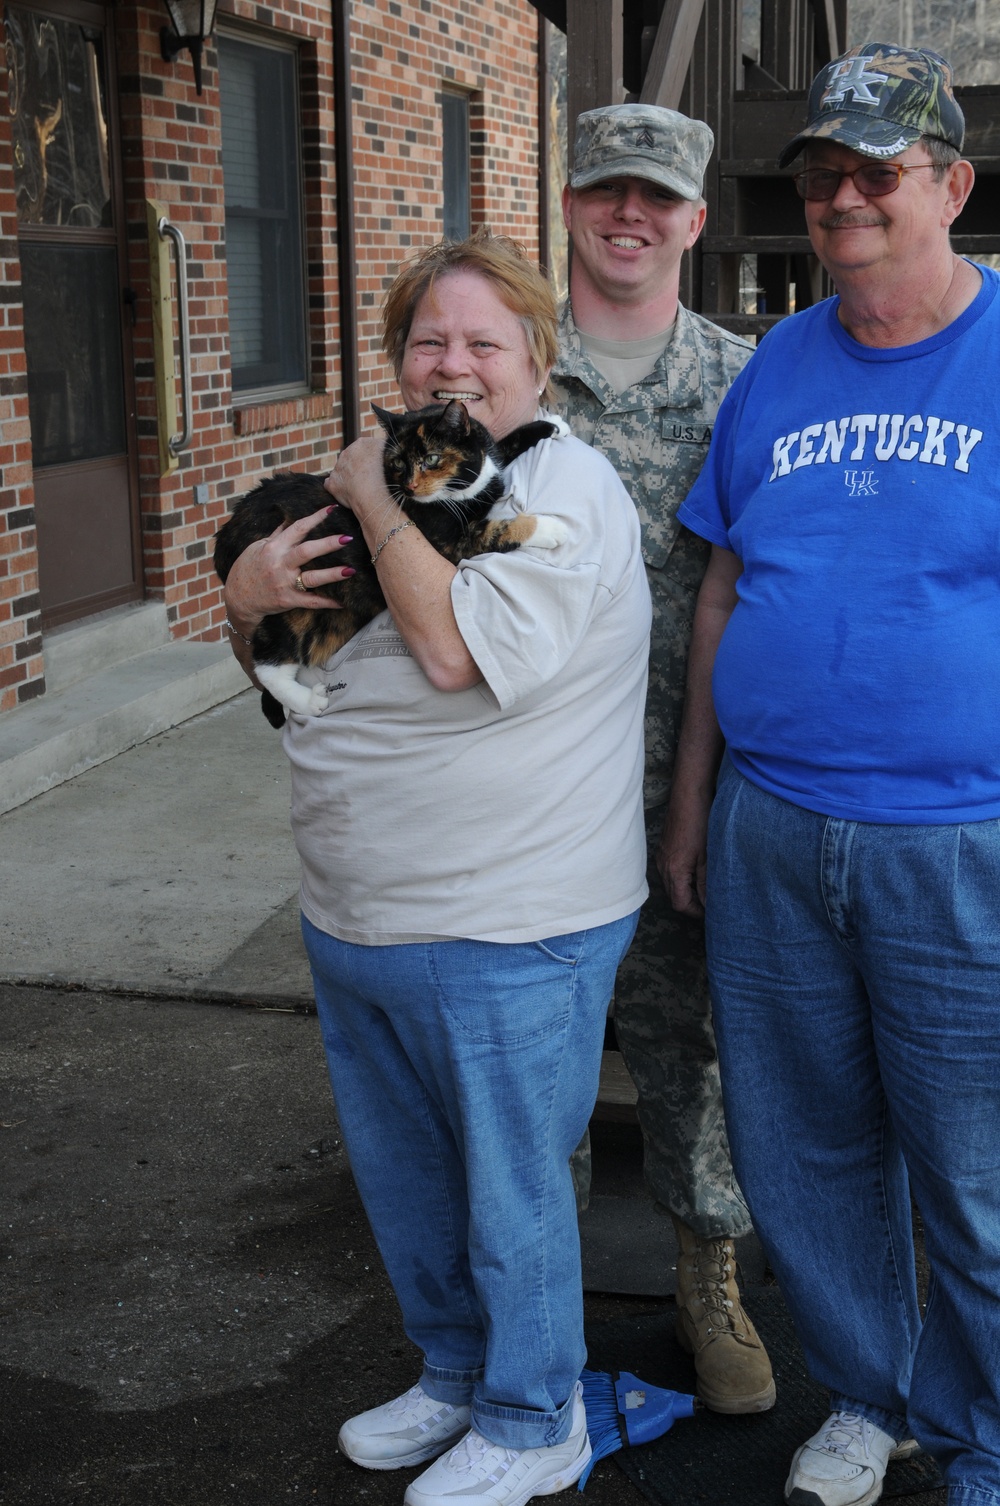 Soldier humbled to help fellow Kentuckians